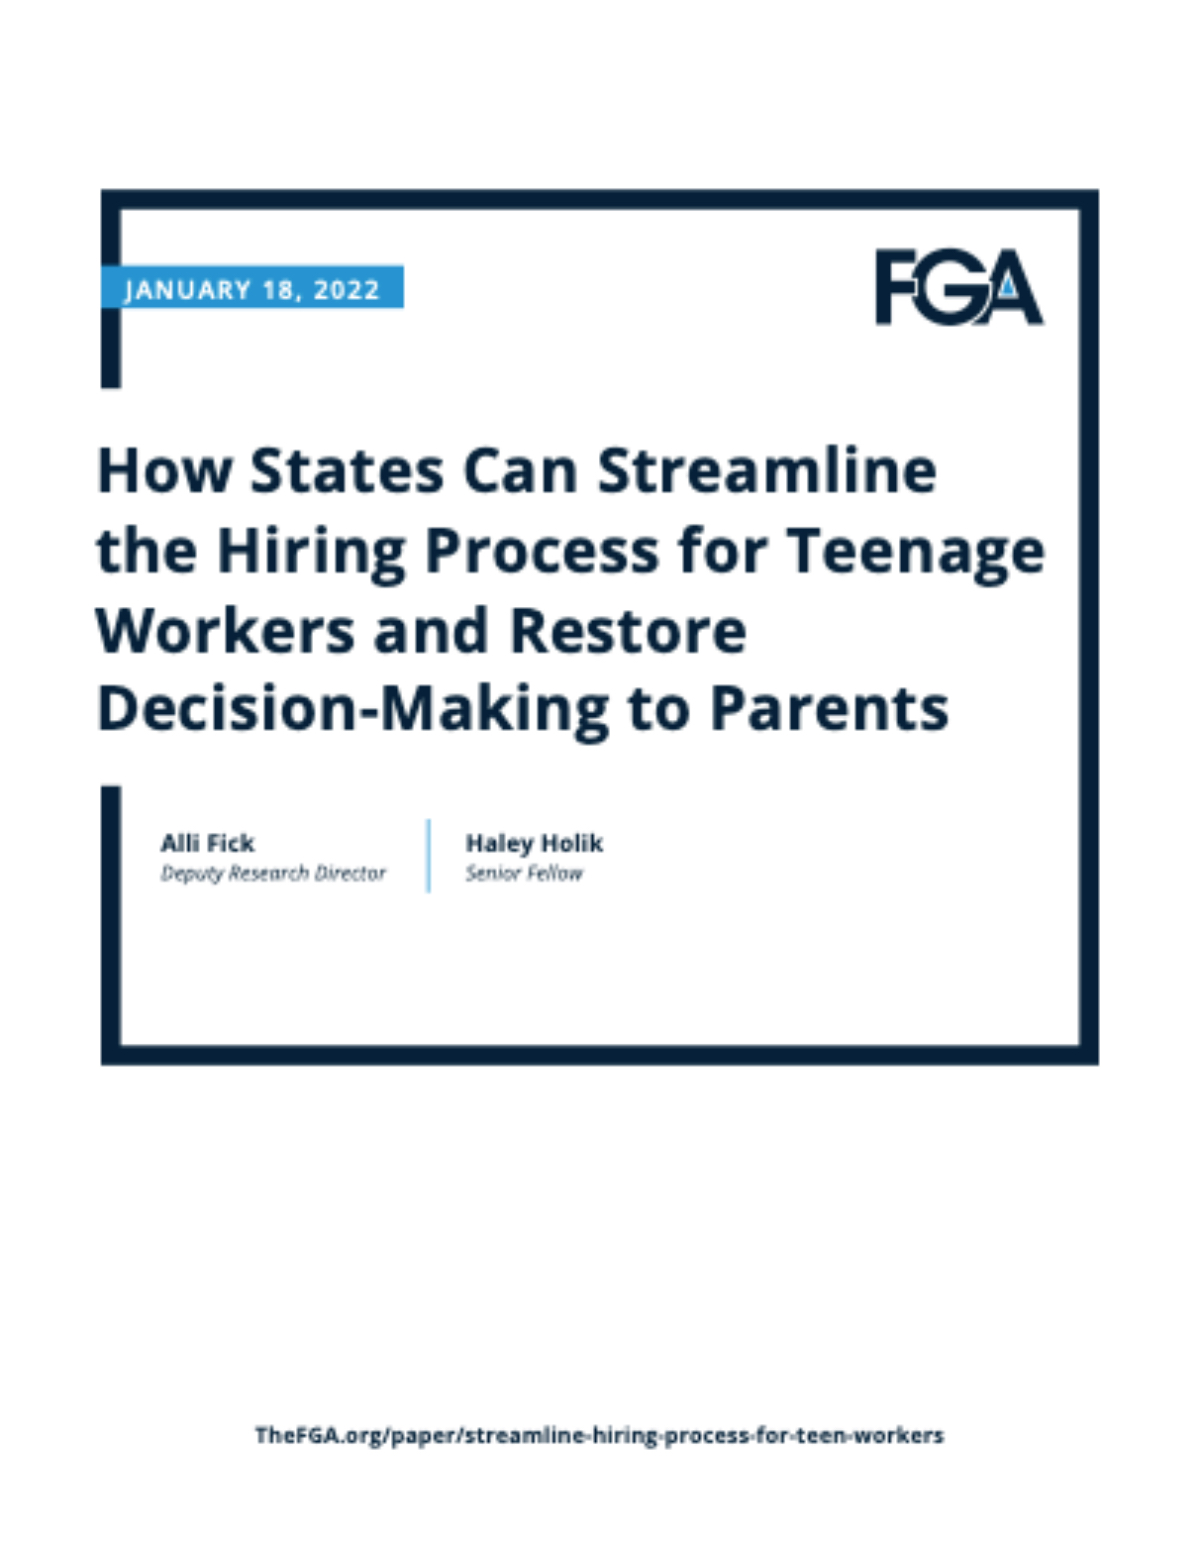 How States Can Streamline the Hiring Process for Teenage Workers and Restore Decision-Making to Parents